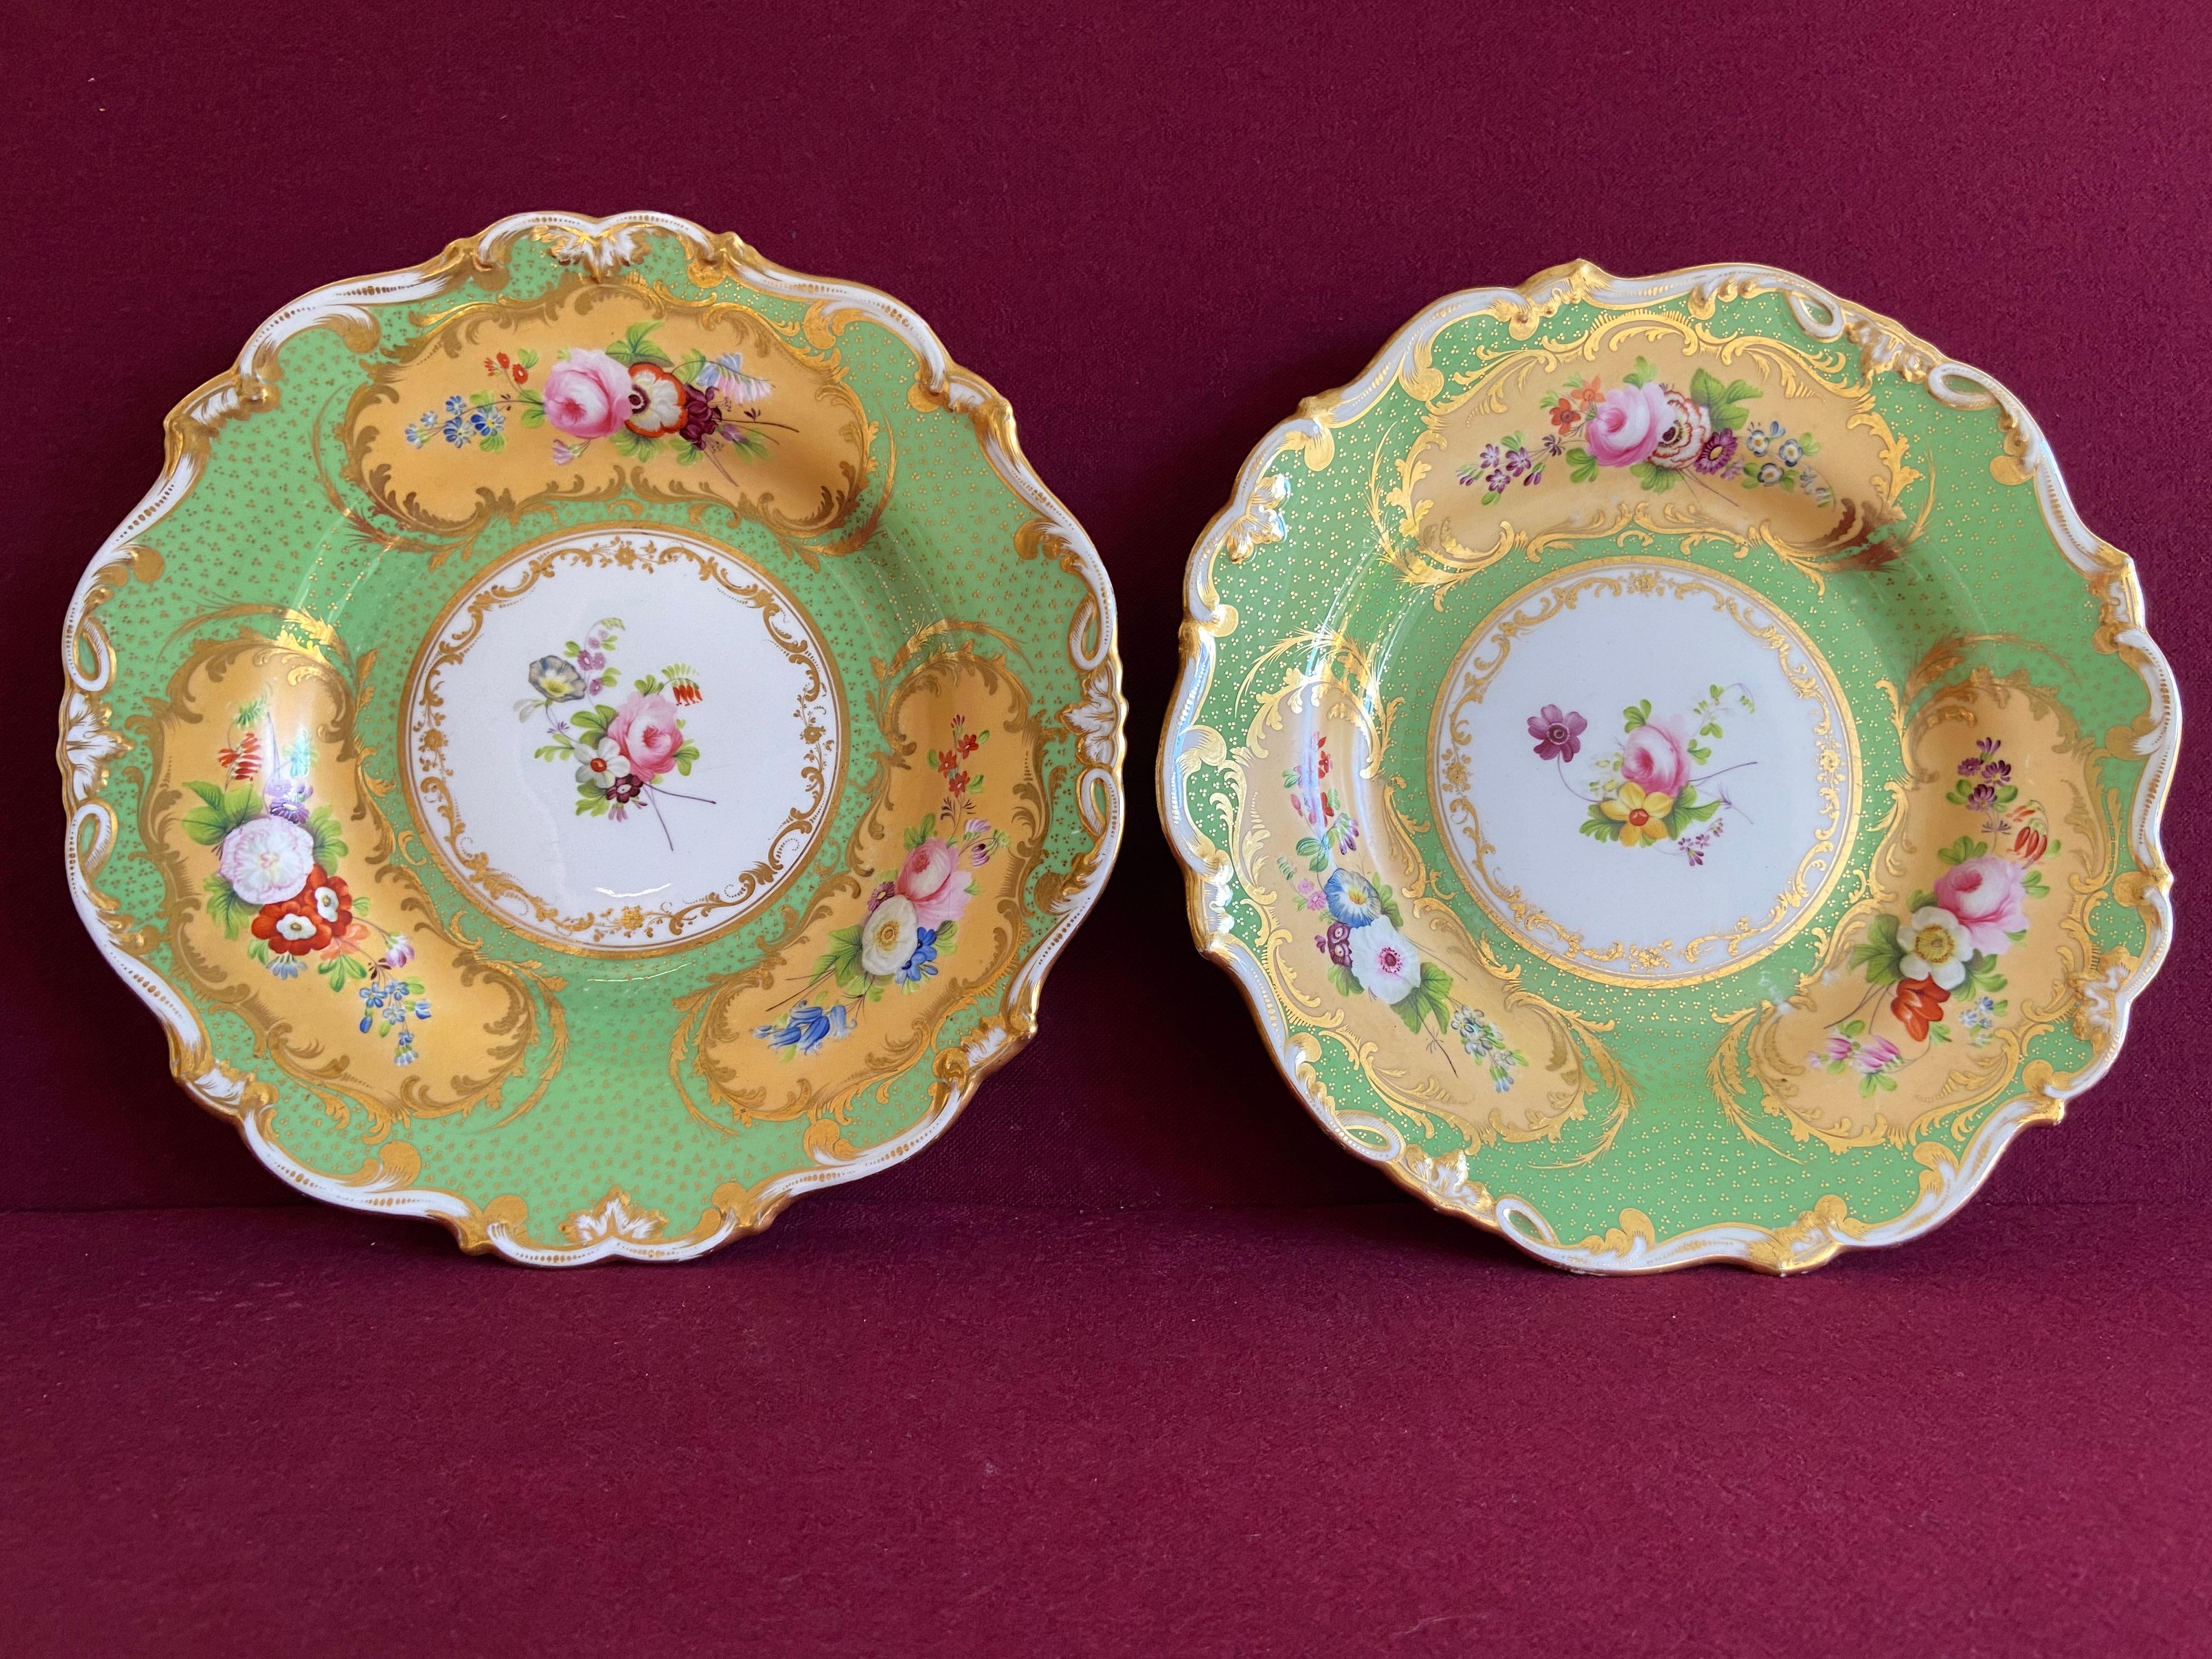 A very fine pair of Minton porcelain dessert plates c.1835. Finely decorated with panels of flowers on a yellow ground set within a green ground border. Marked pattern number 3332.

Condition: Hairline crack to the underside of one plate and some